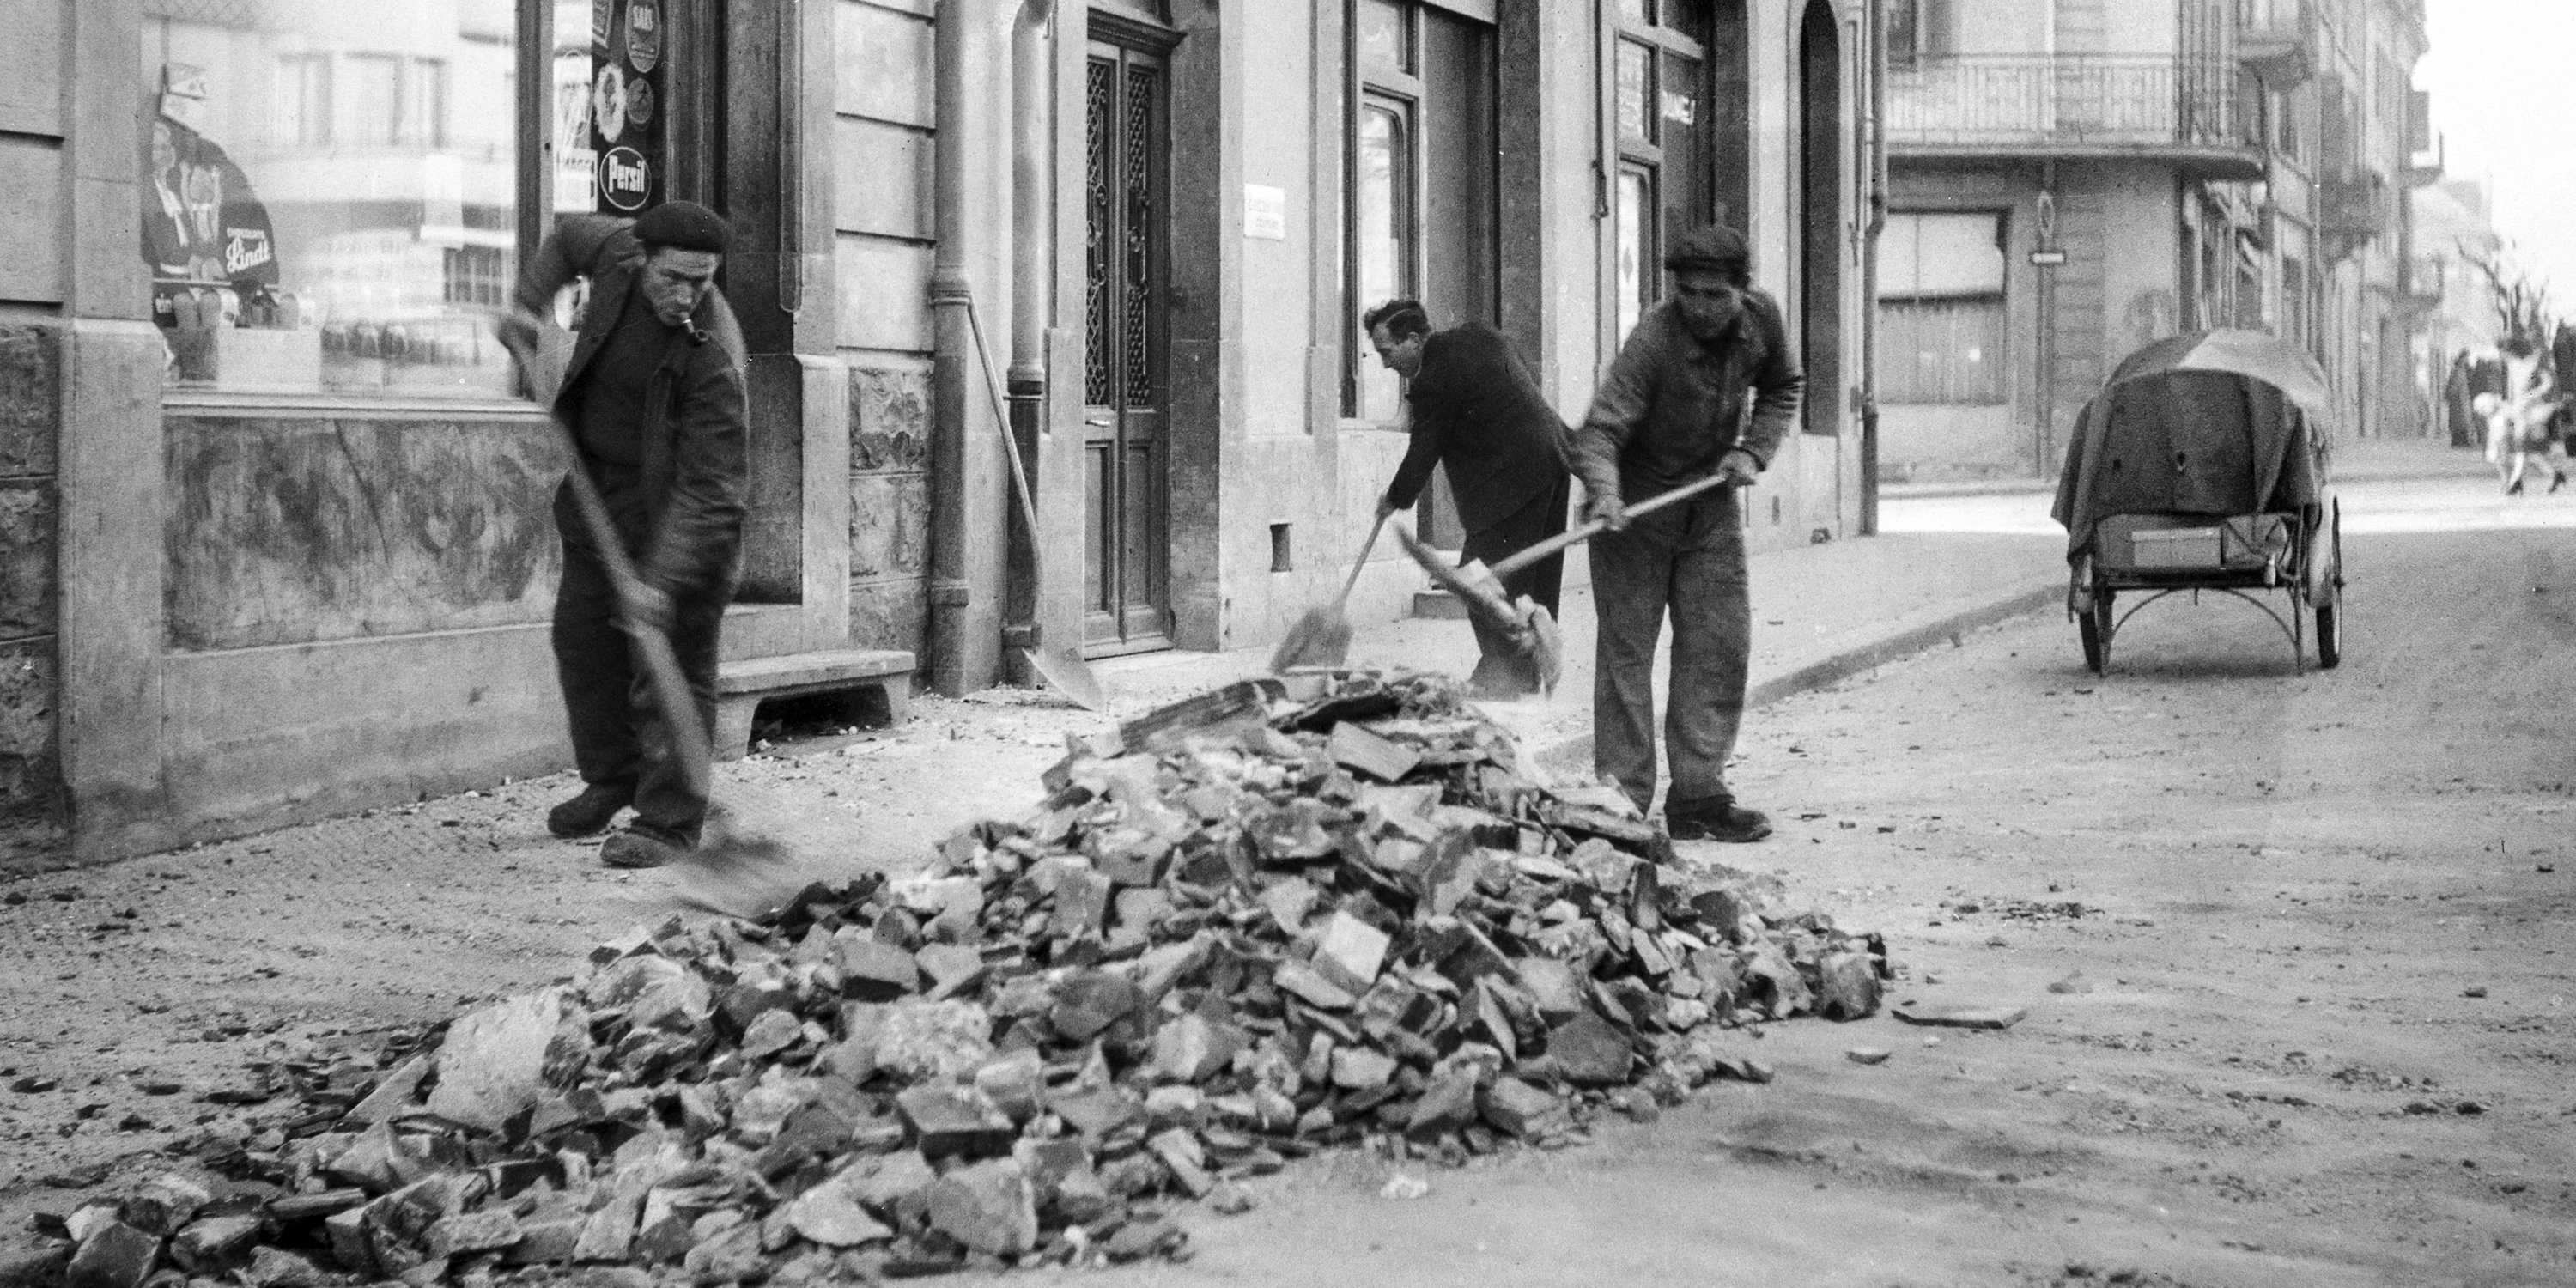 Old black and white picture of three men sweeping debris from the street.